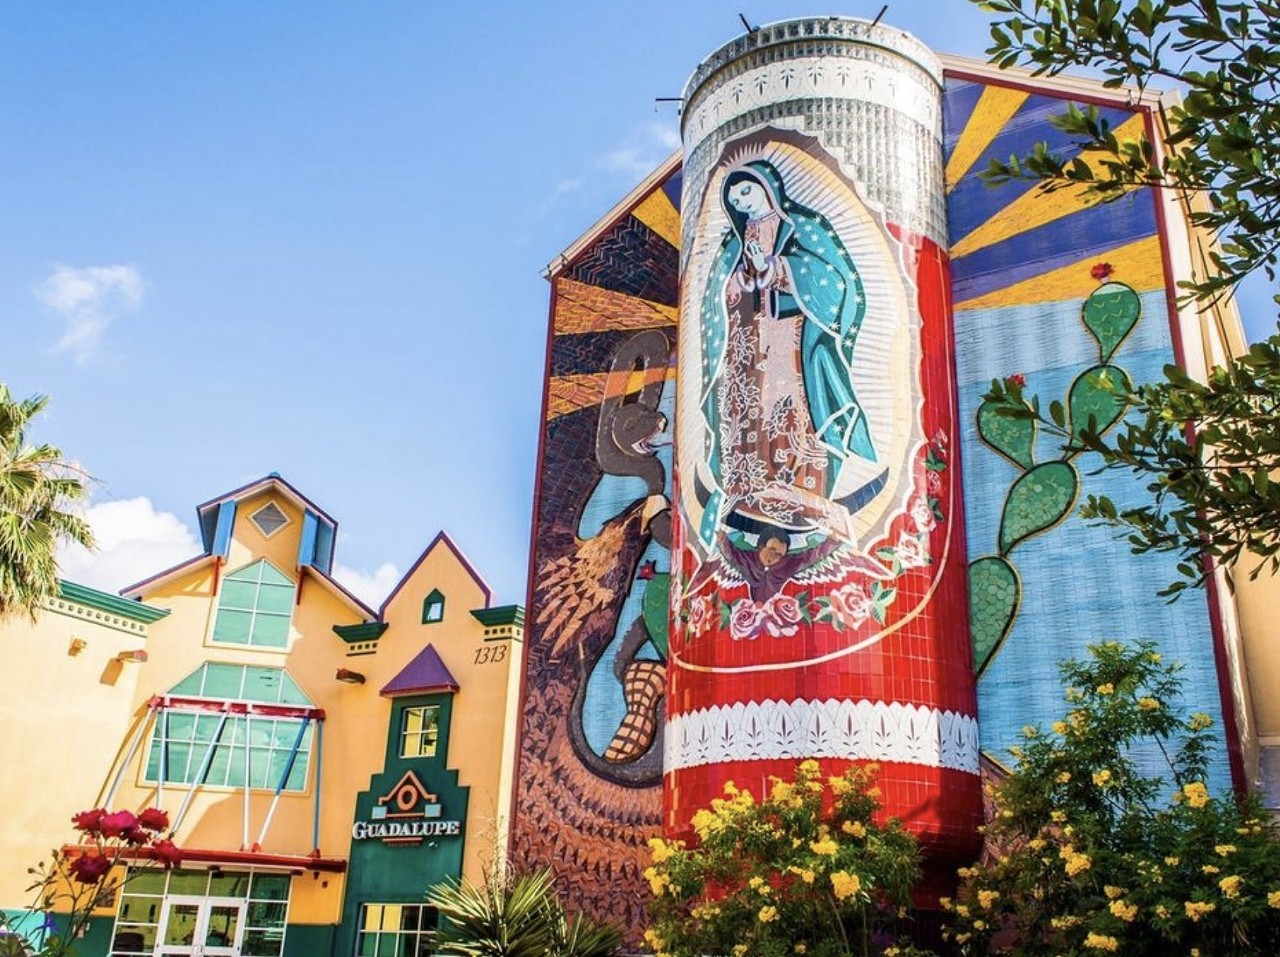 World's Largest Virgin Mary Mosaic
1315 Guadalupe St.
Jesse Treviño's spectacular mural La Veladora of Our Lady of Guadalupe features a 3D votive candle (veladora) with an eternal flame facing Guadalupe Street. Intended to serve as a beacon for the neighborhood, this mixed media mural is truly magnificent, and is even said to be the world's largest Virgin Mary mosaic.